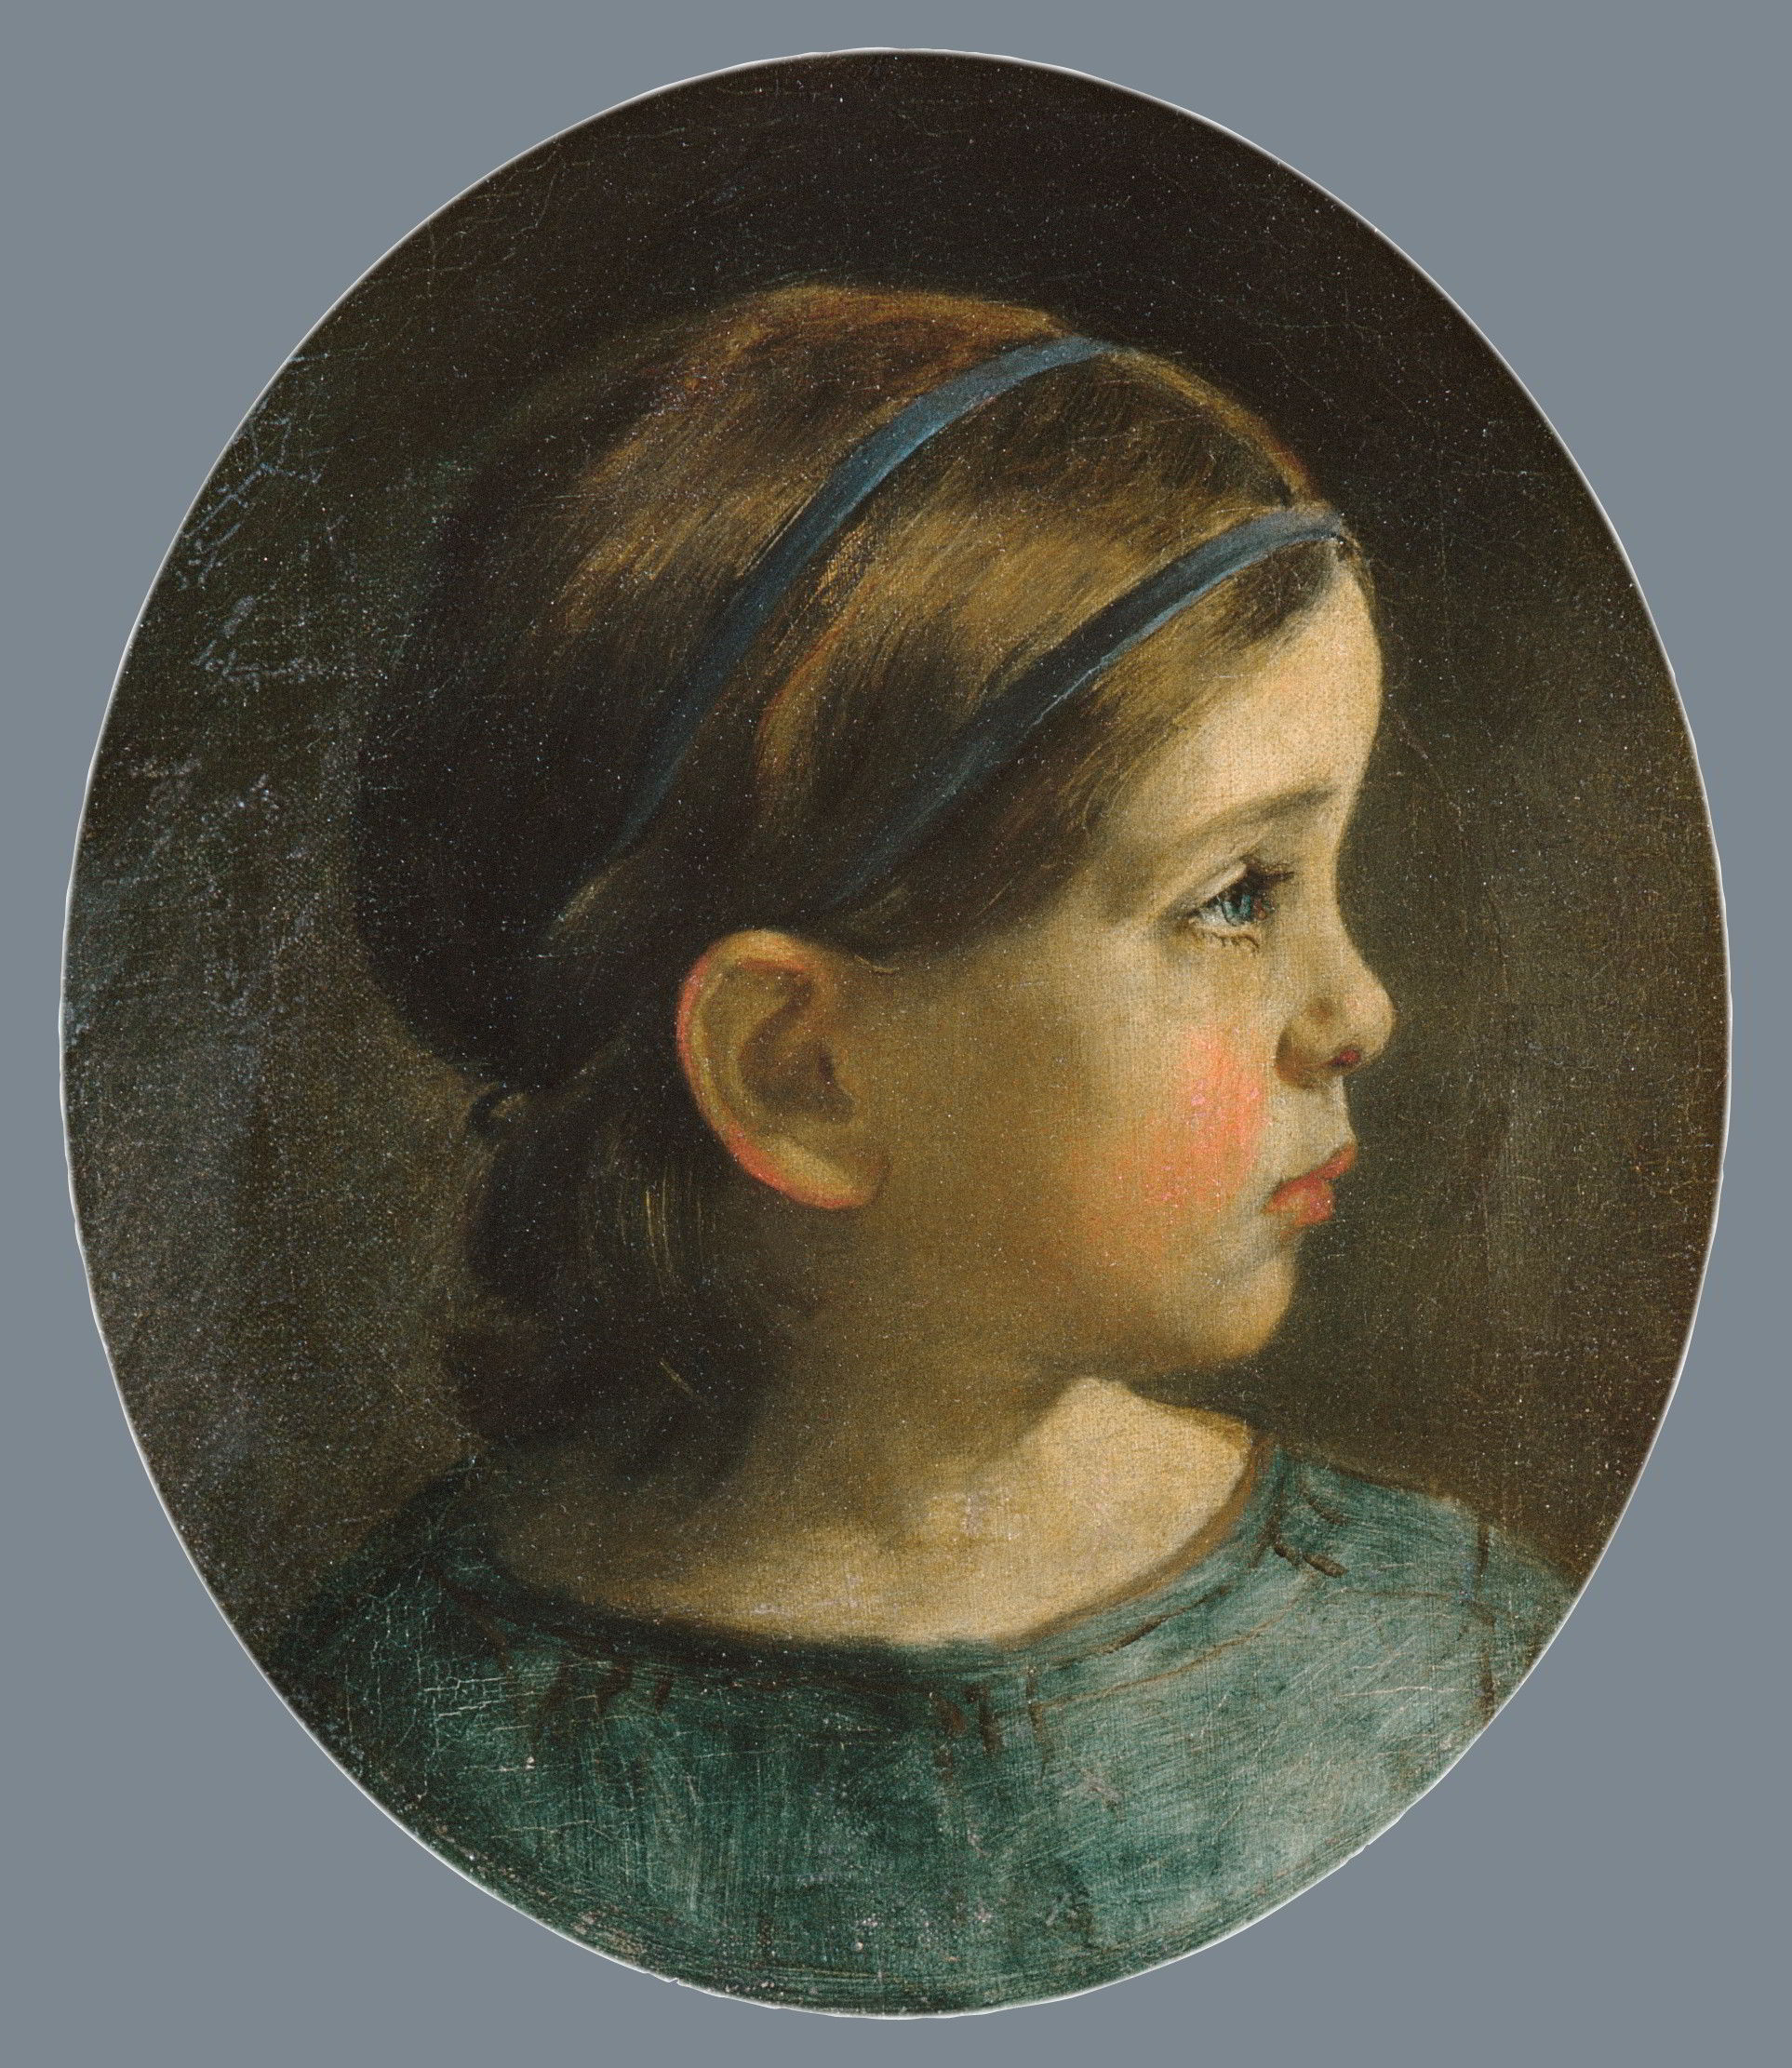 Daughter of William Page (probably Mary Page) by William Page